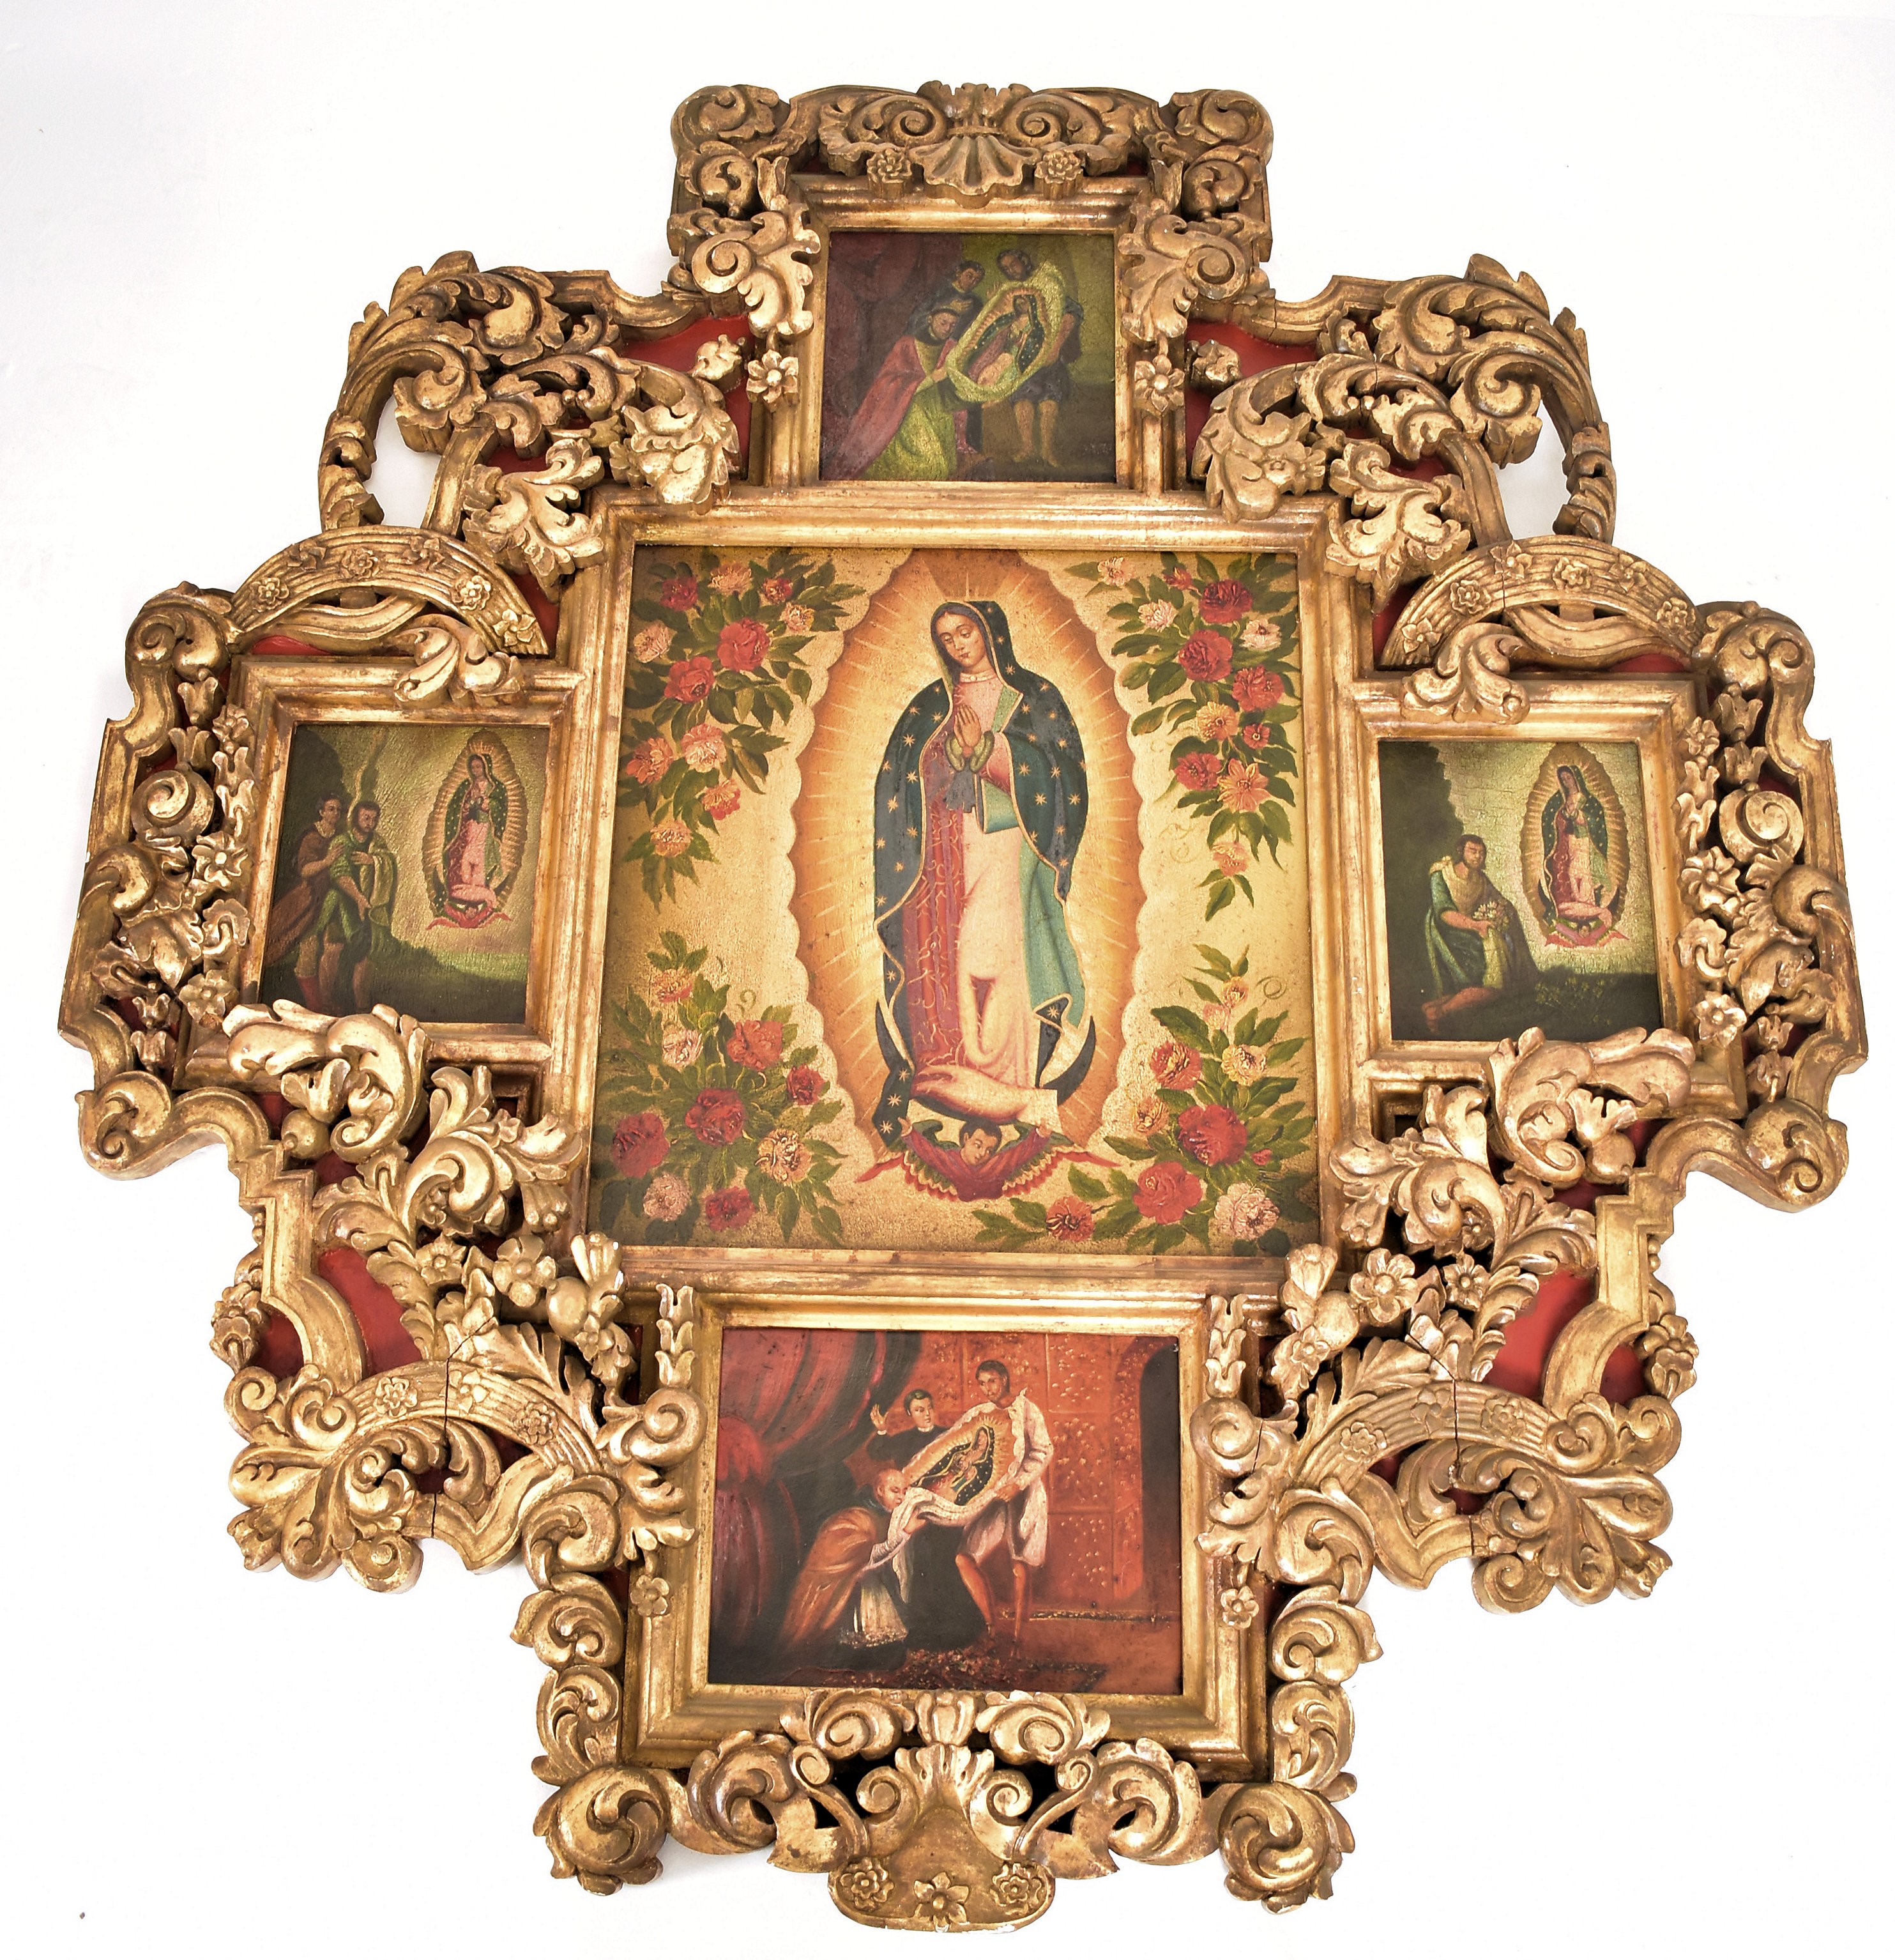 SPANISH COLONIAL SCHOOL - MEXICAN VIRGIN OF GUADALUPE PANEL